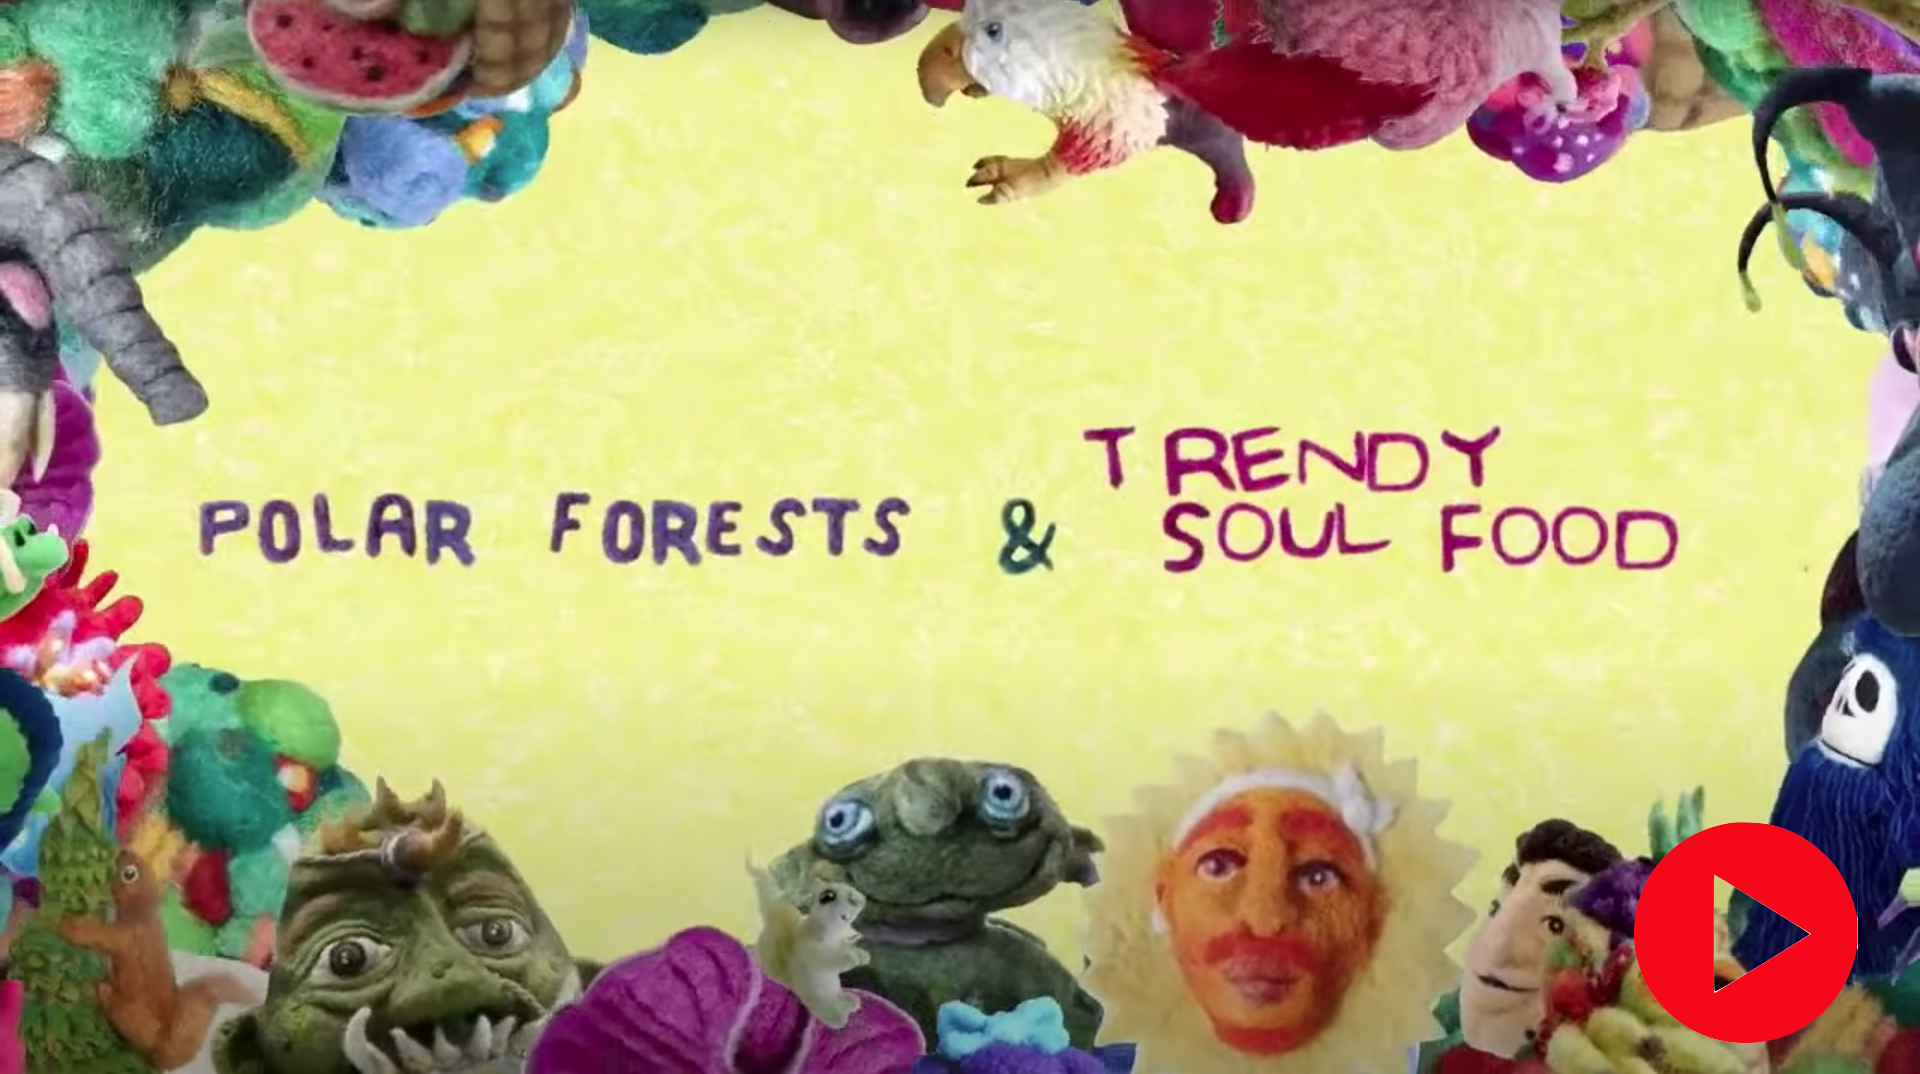 Mixed Taste: Polar Forests & Trendy Soul Food